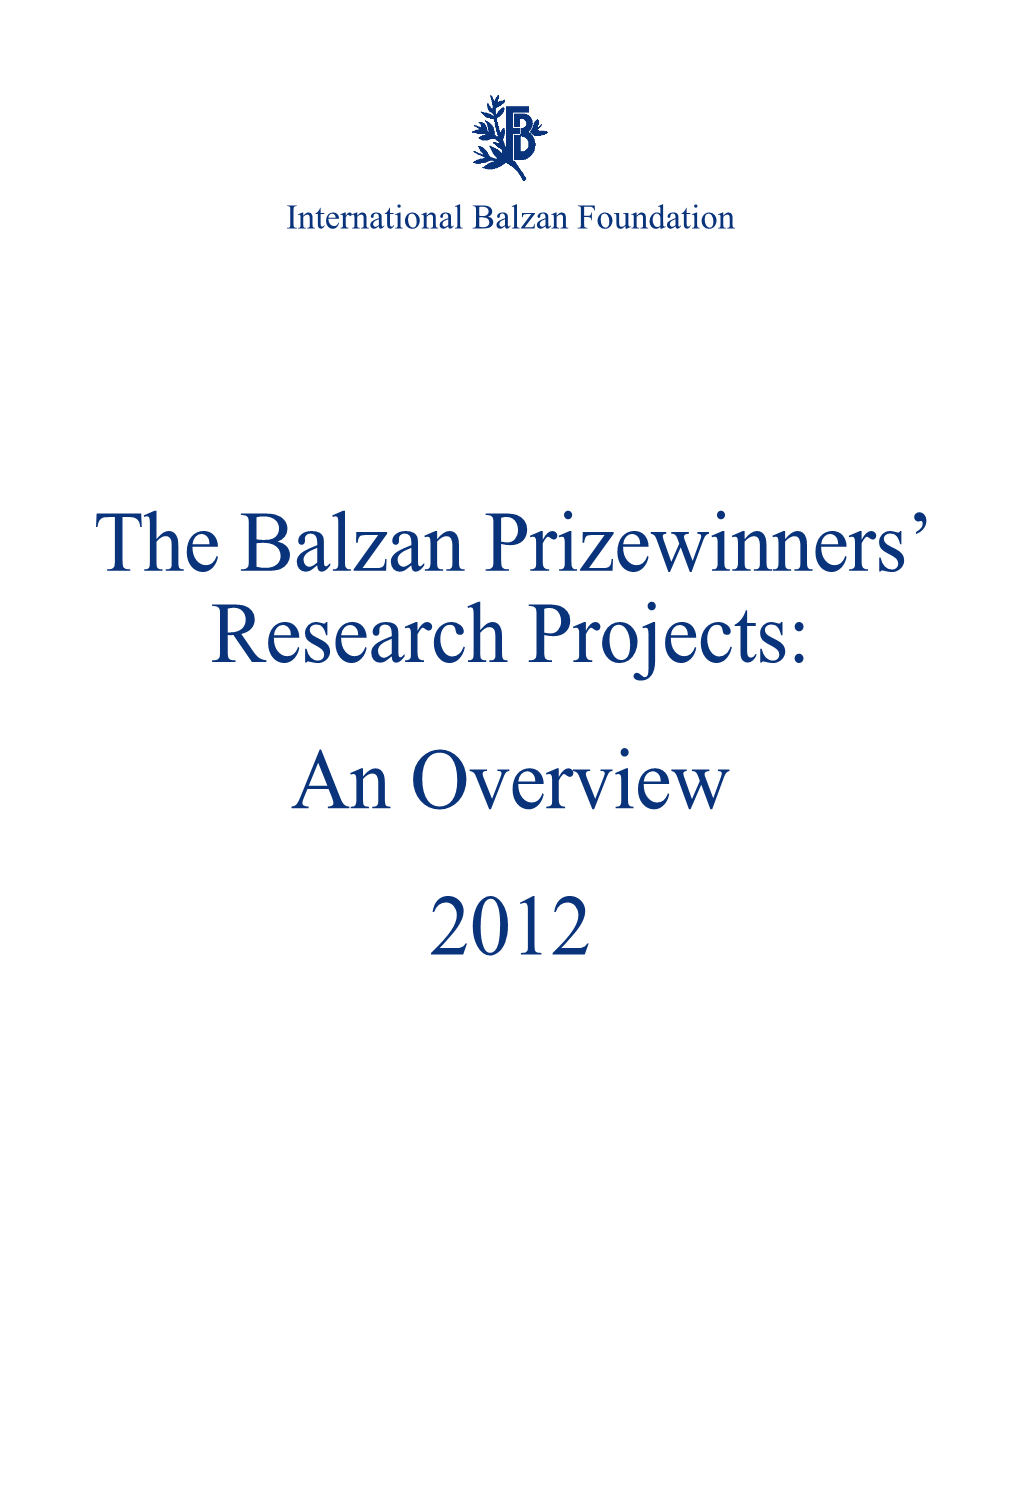 The Balzan Prizewinners' Research Projects: an Overview 2012